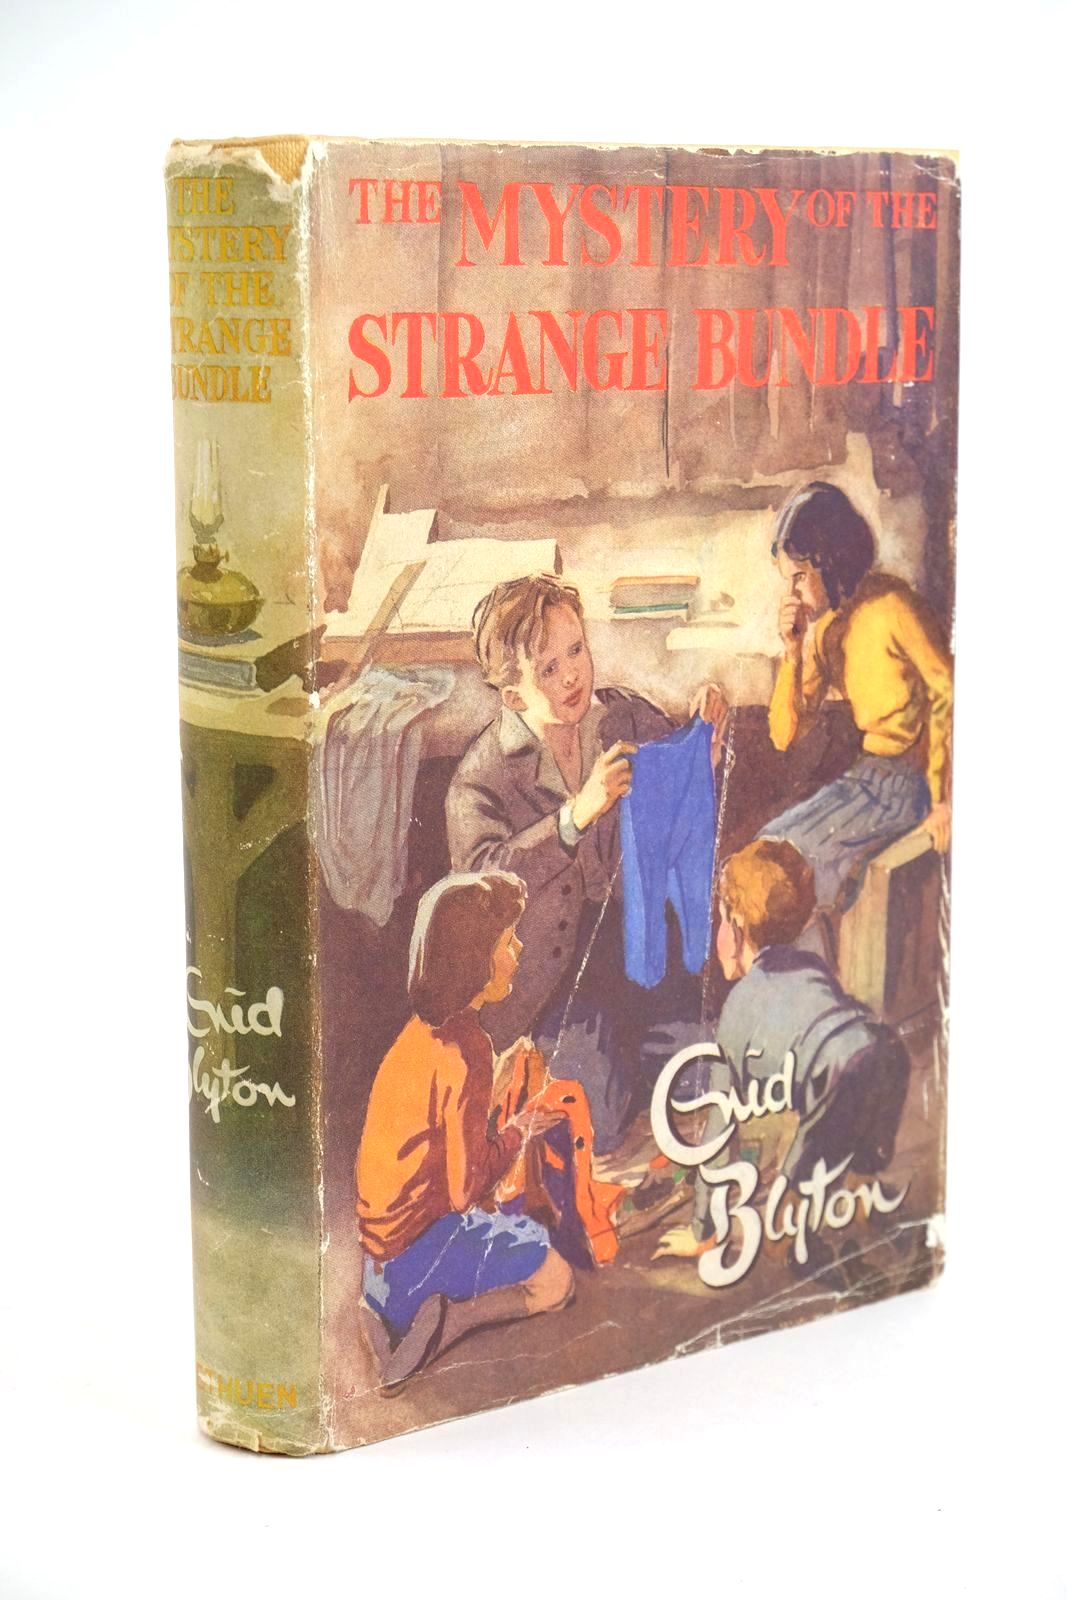 Photo of THE MYSTERY OF THE STRANGE BUNDLE written by Blyton, Enid illustrated by Evans, Treyer published by Methuen & Co. Ltd. (STOCK CODE: 1323588)  for sale by Stella & Rose's Books